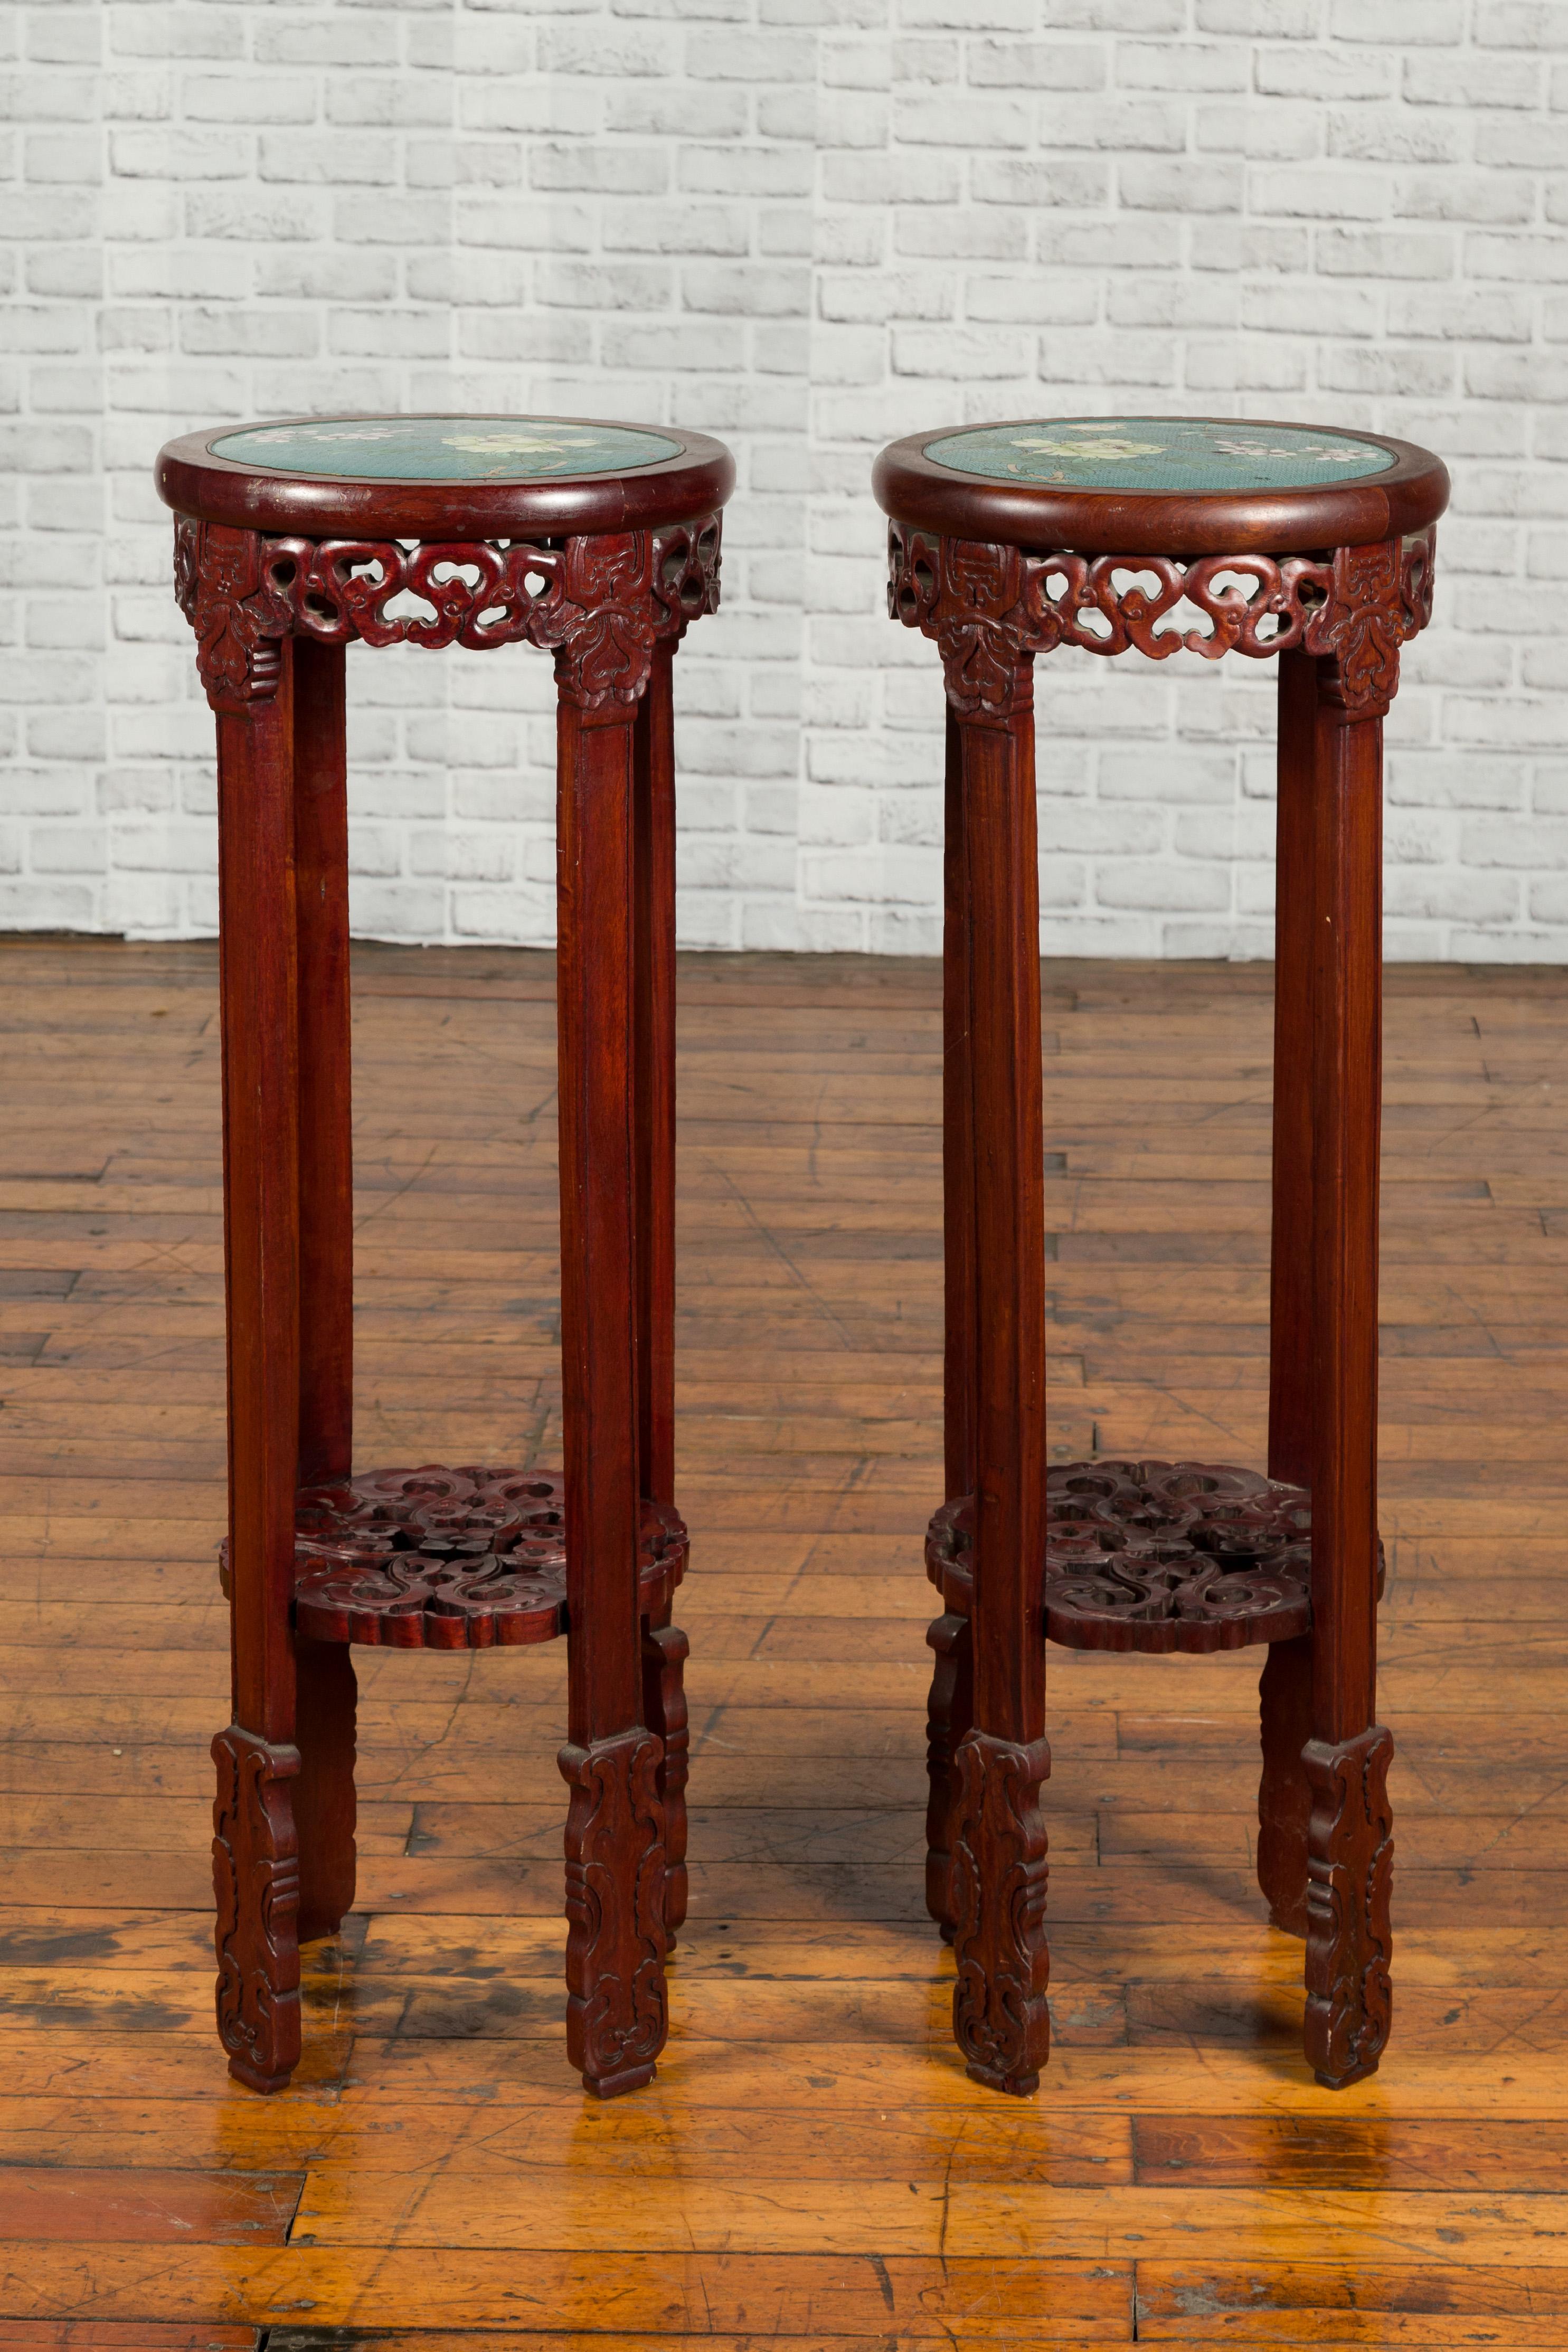 A pair of antique Chinese stands from the early 20th century, with painted floral and bird decor and carved aprons. Created in China during the early 20th century, each of this pair of wooden stands features a circular top adorned with an exquisite